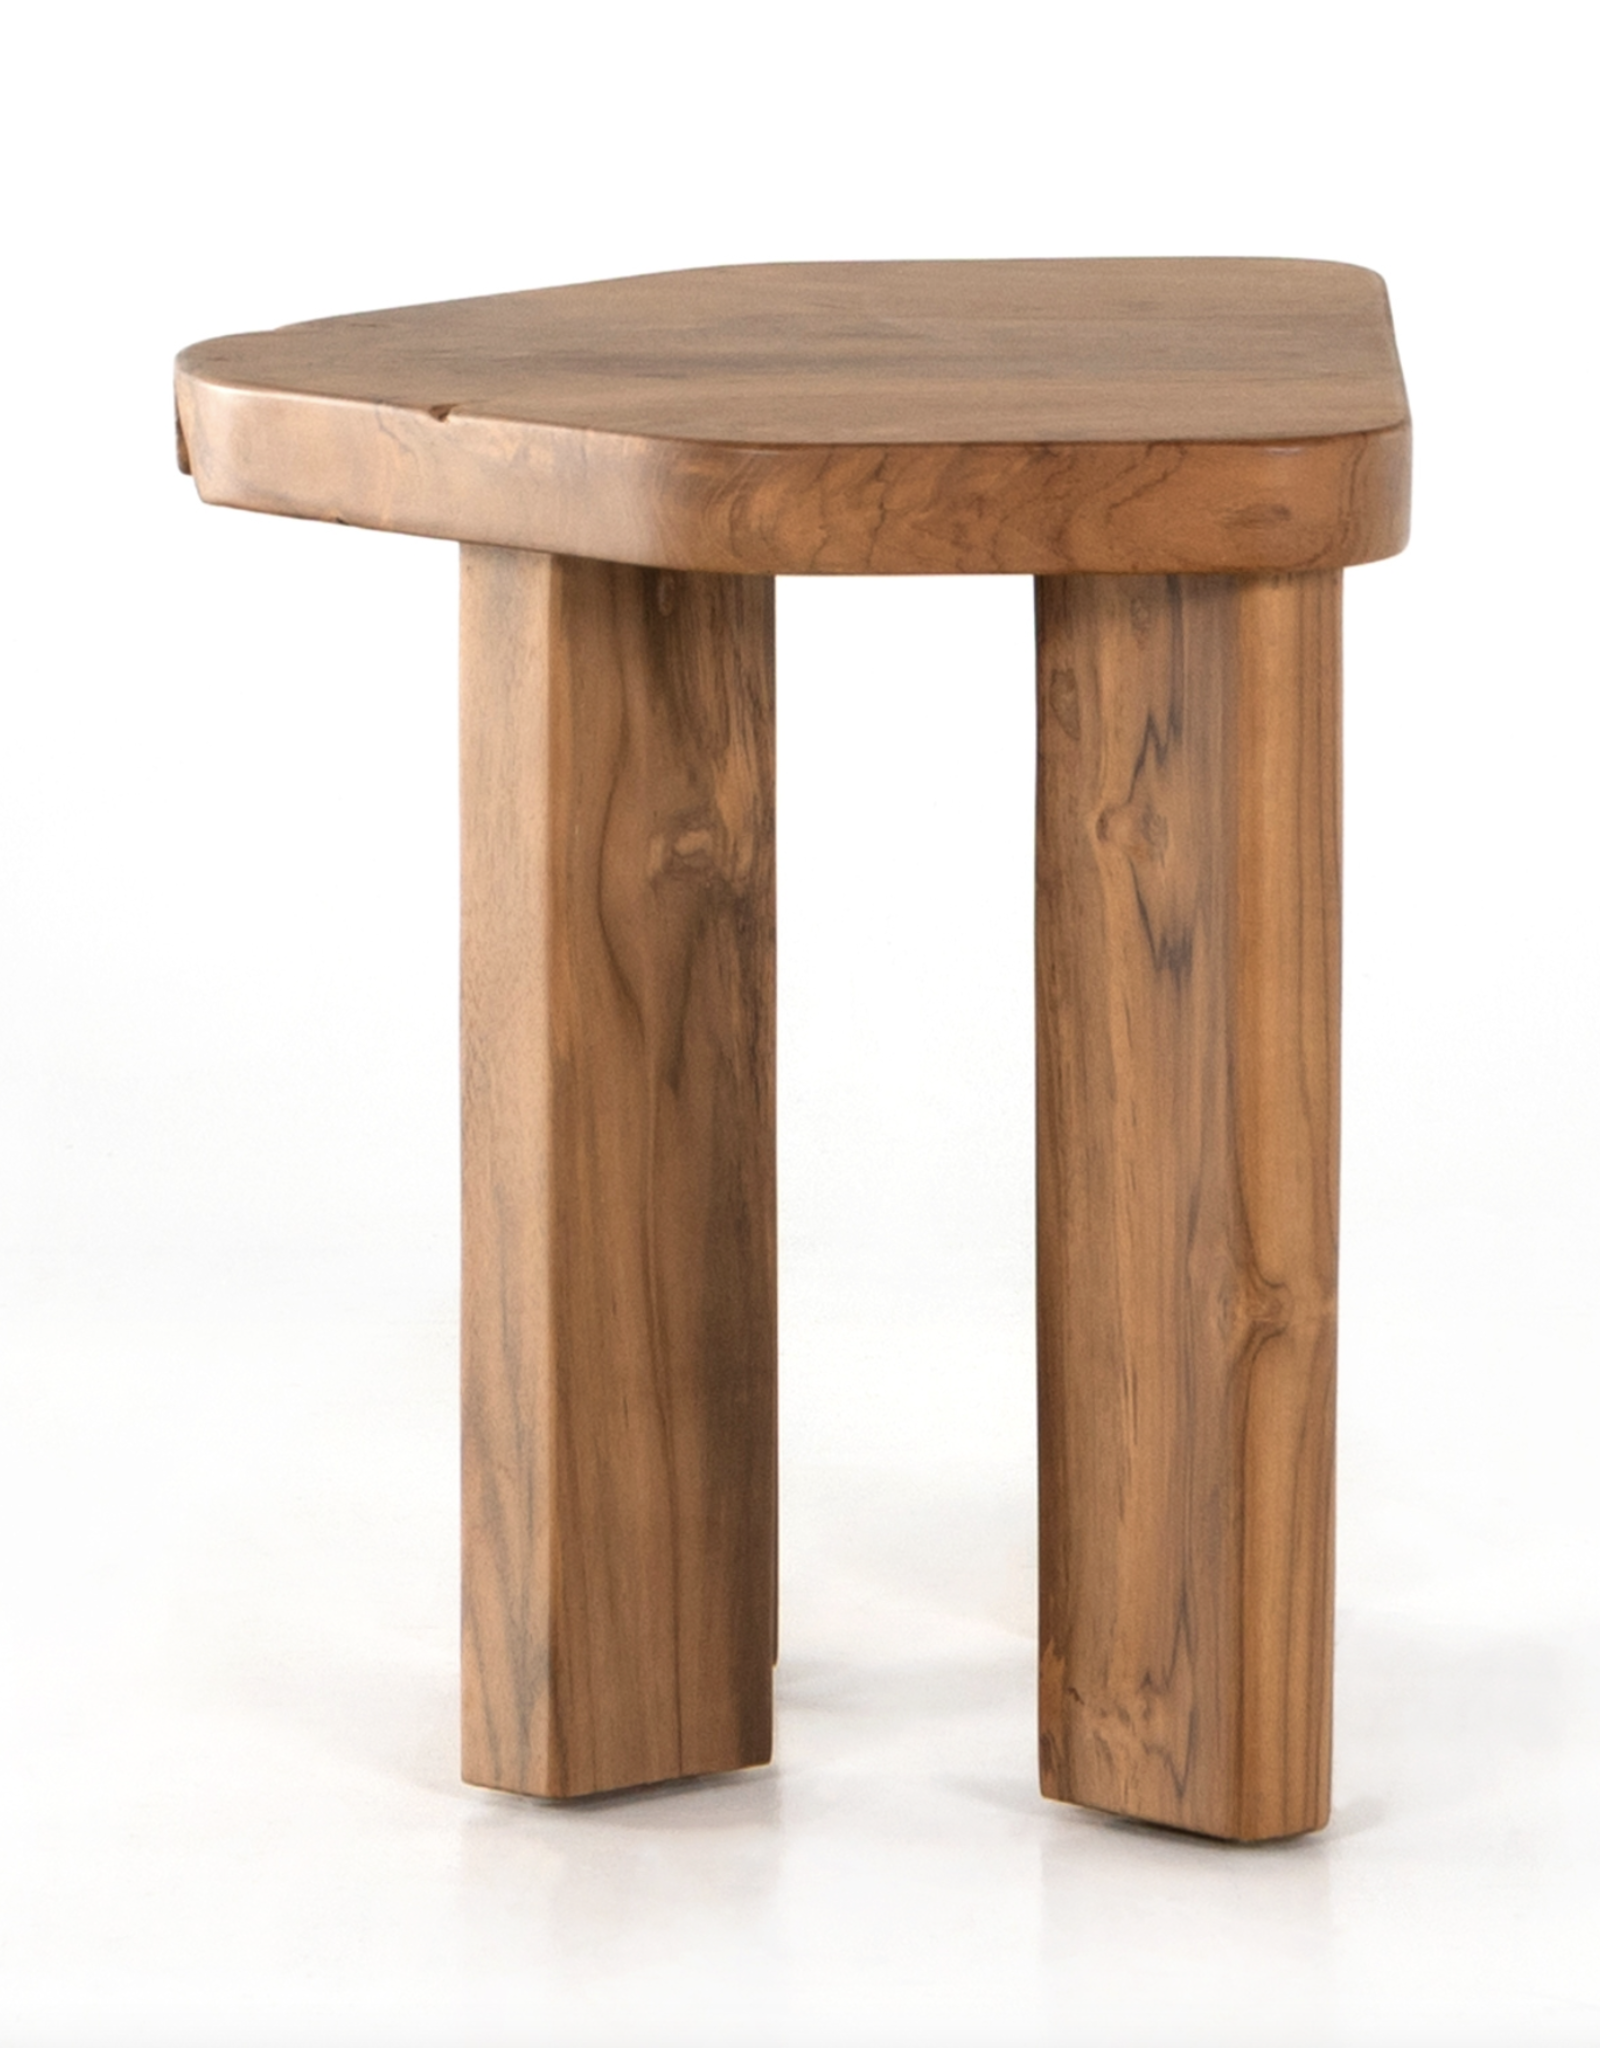 Haines Accent Stool in Aged Natural Teak